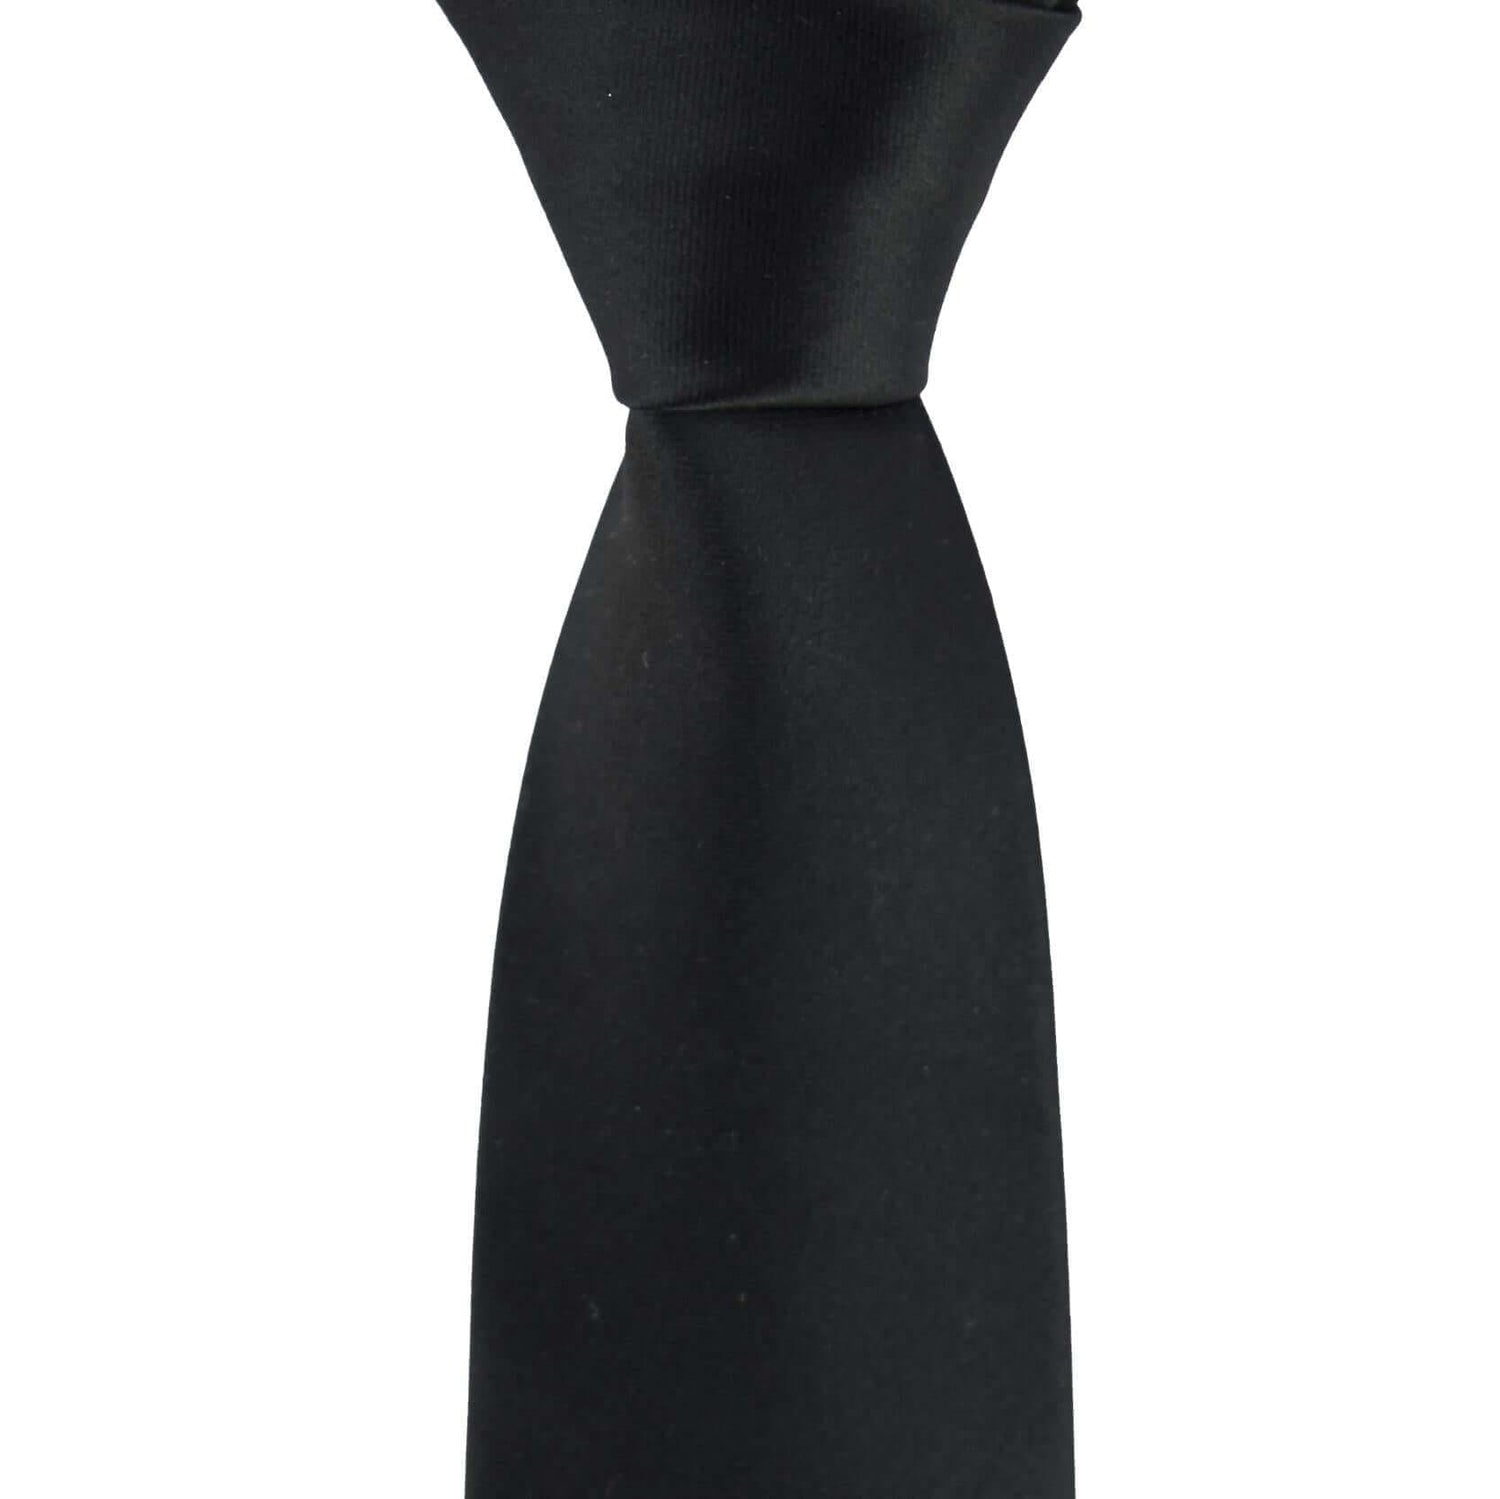 100% Silk Extra Long Solid Tie for Big and Tall Men - Skinny Modern Width